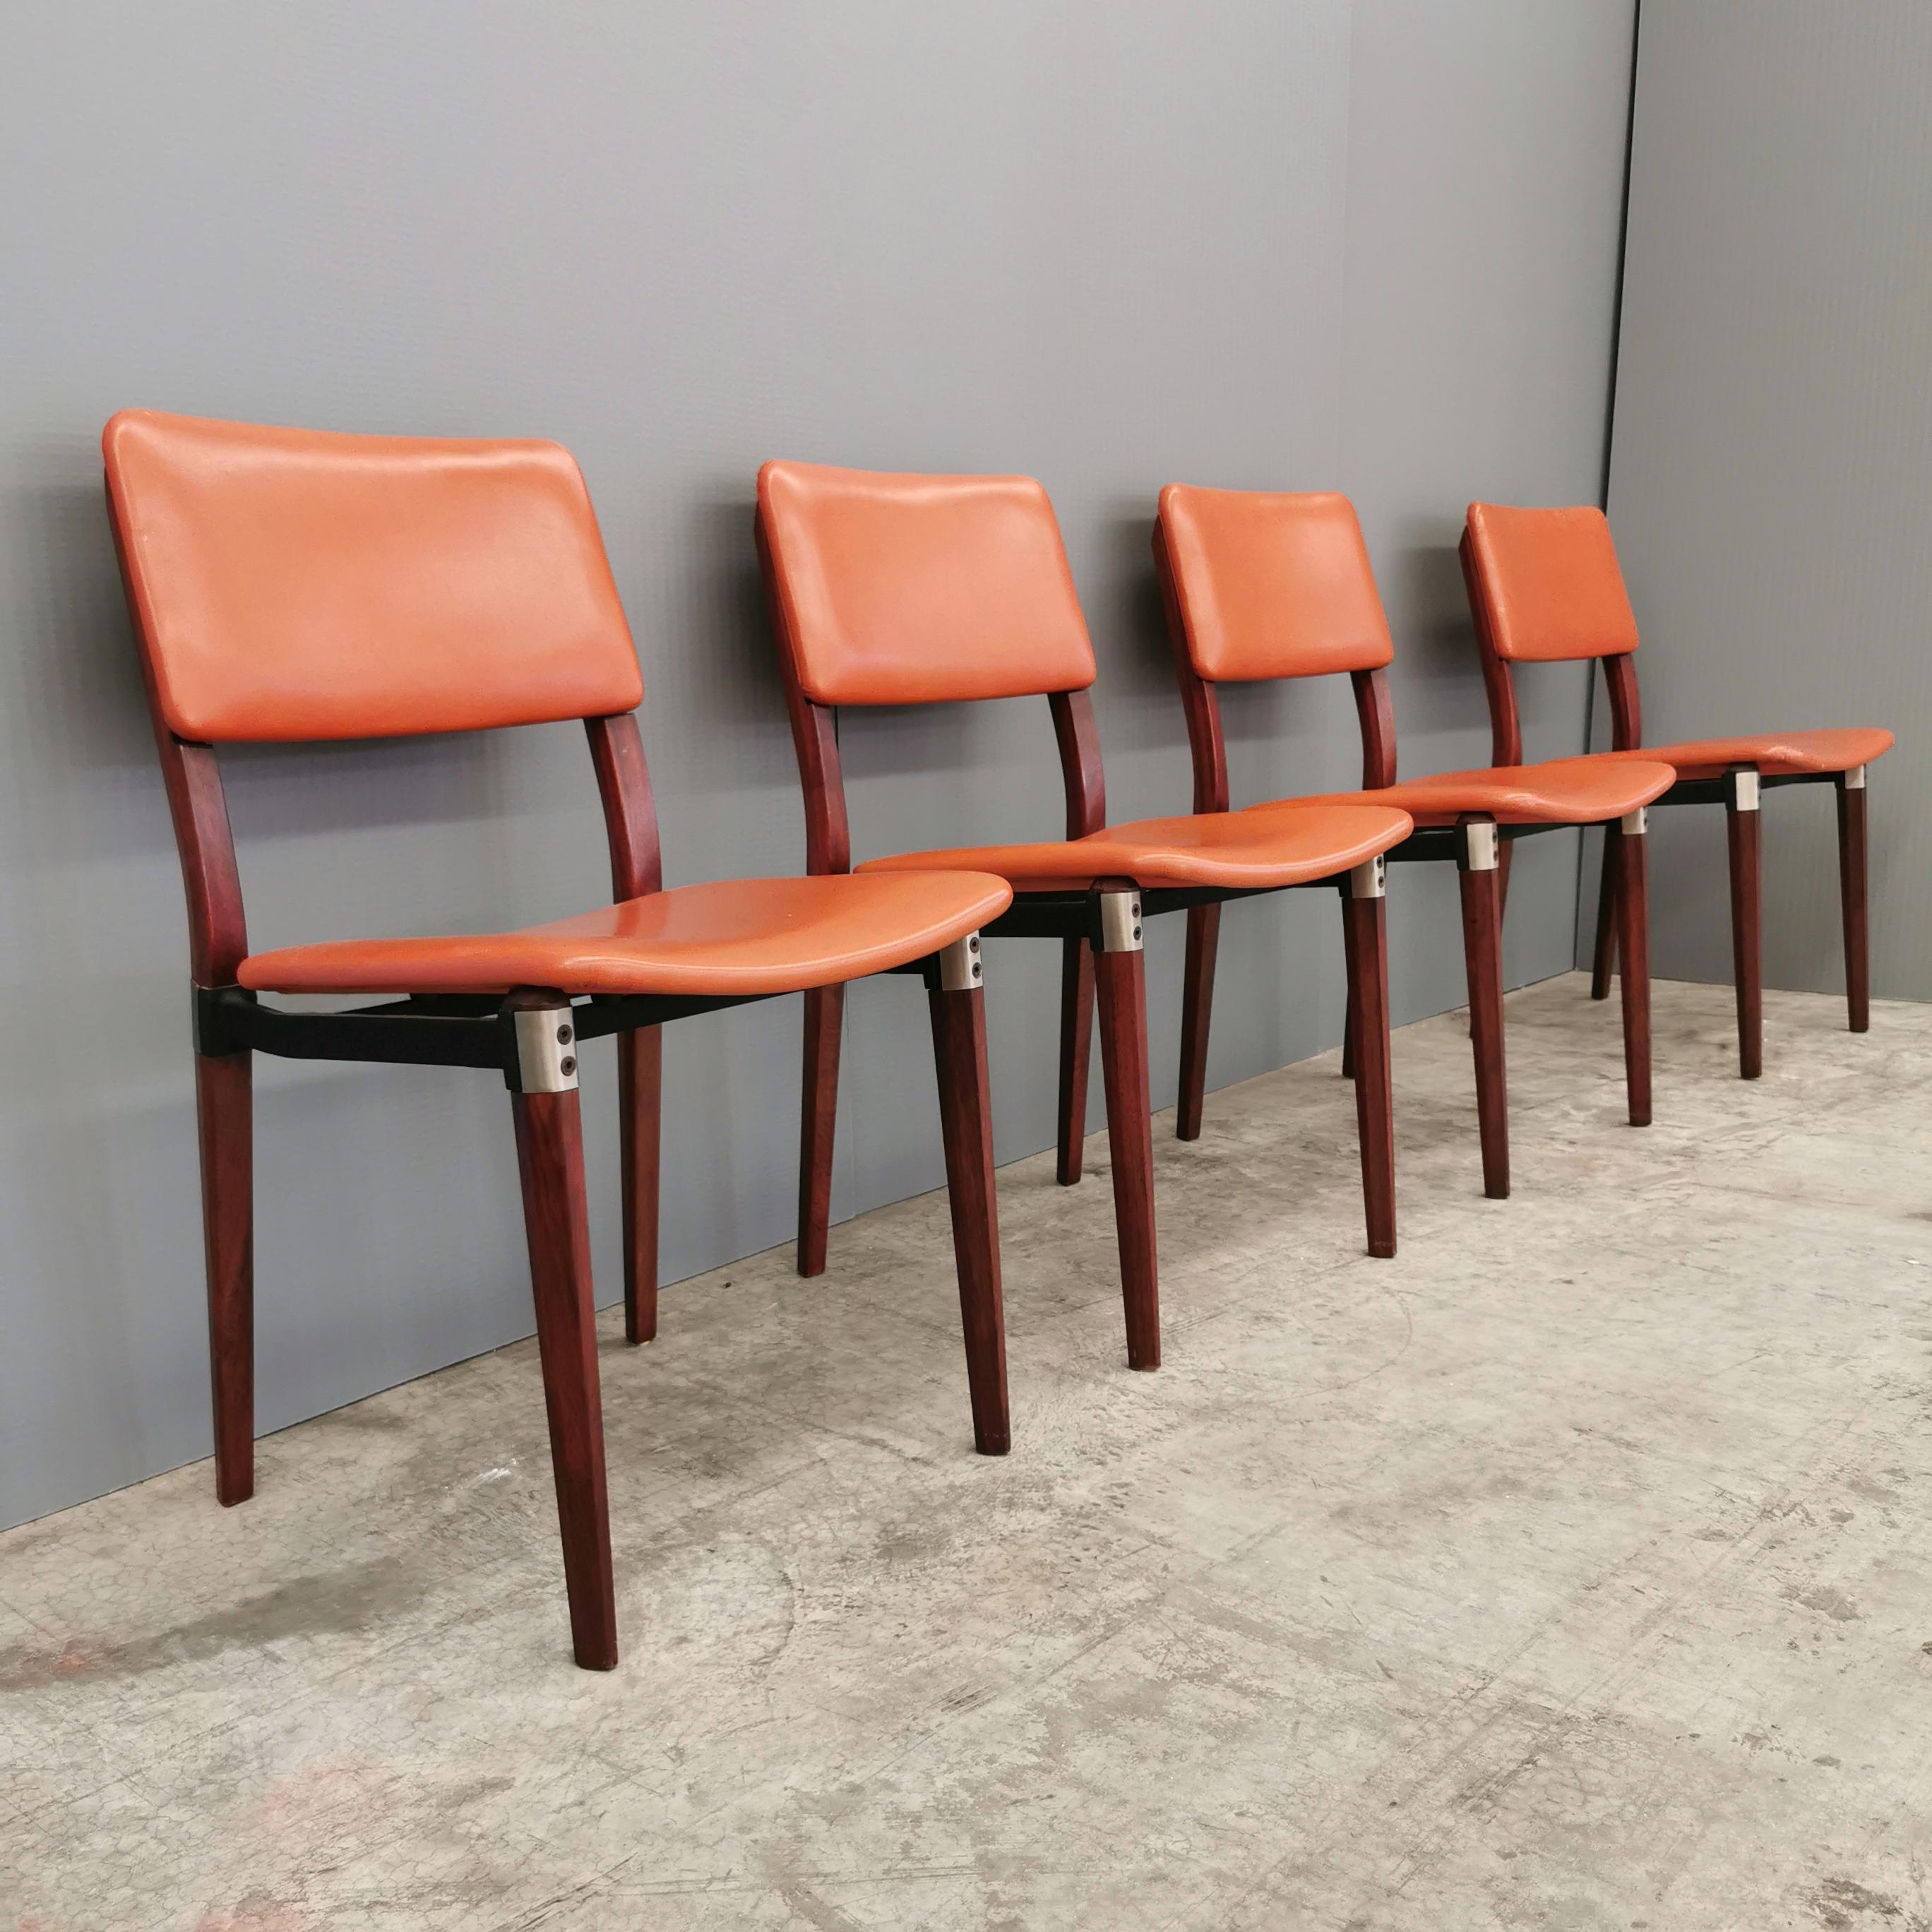 set of 4 chairs with wooden frame and leather upholstery. Designed, in the early 1960s, by Eugenio Gerli for Tecno. Very elegant and sturdy chair with steel inserts and joints. The chairs present in Excellent Condition with no scratches marks or